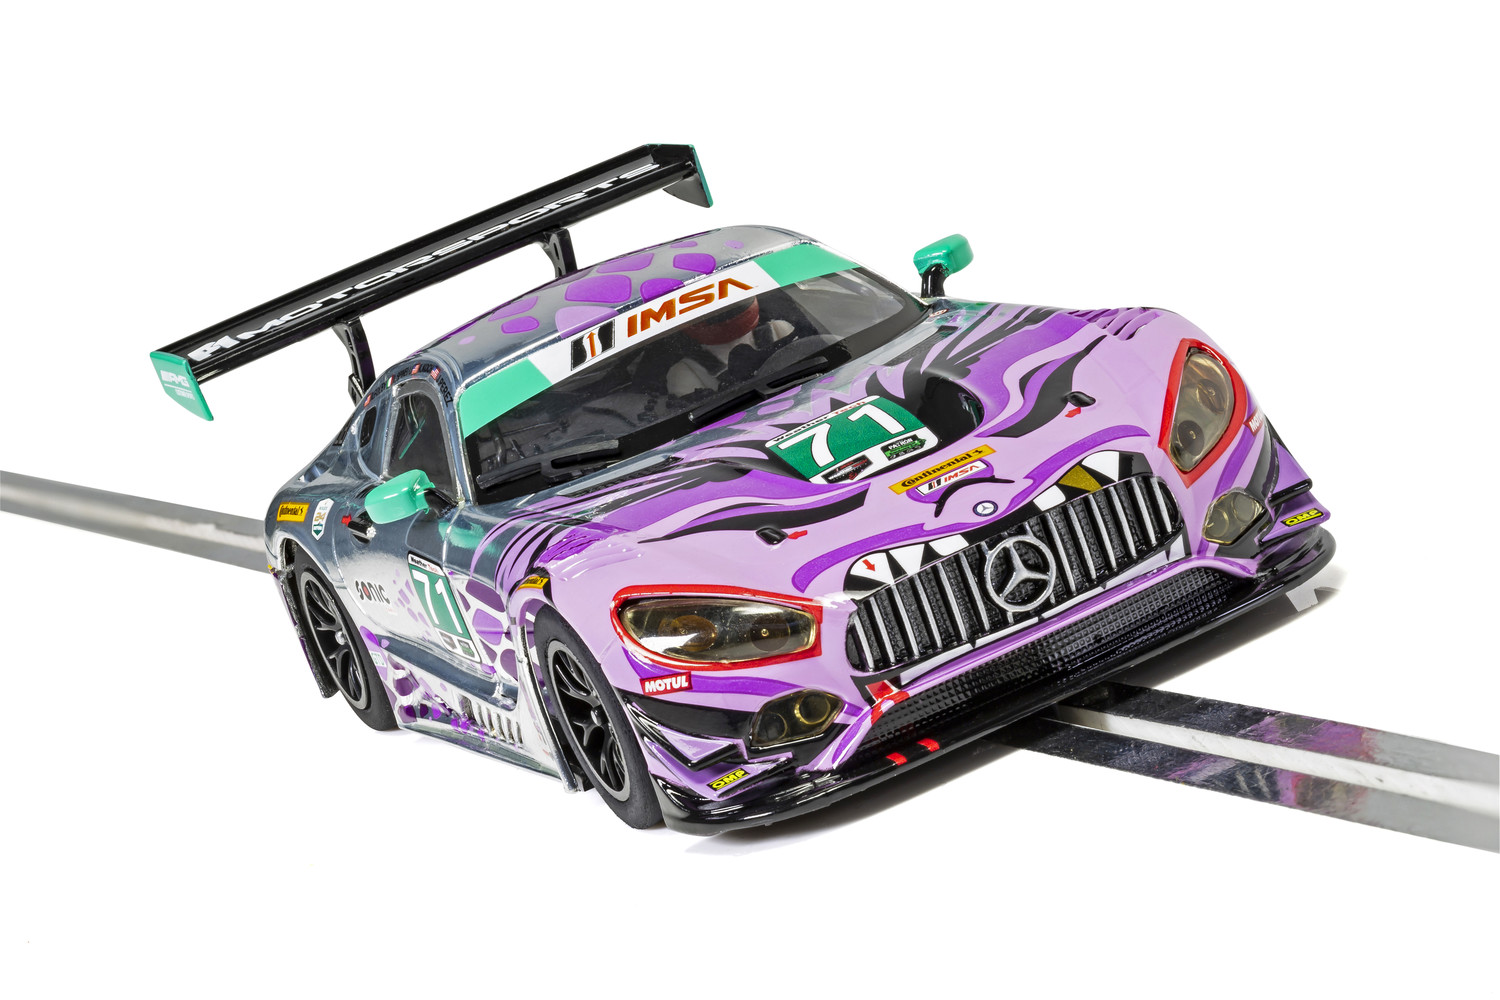 Mercedes AMG GT3 Riley Motorsports Equipo 1:32 Scalextric coche 